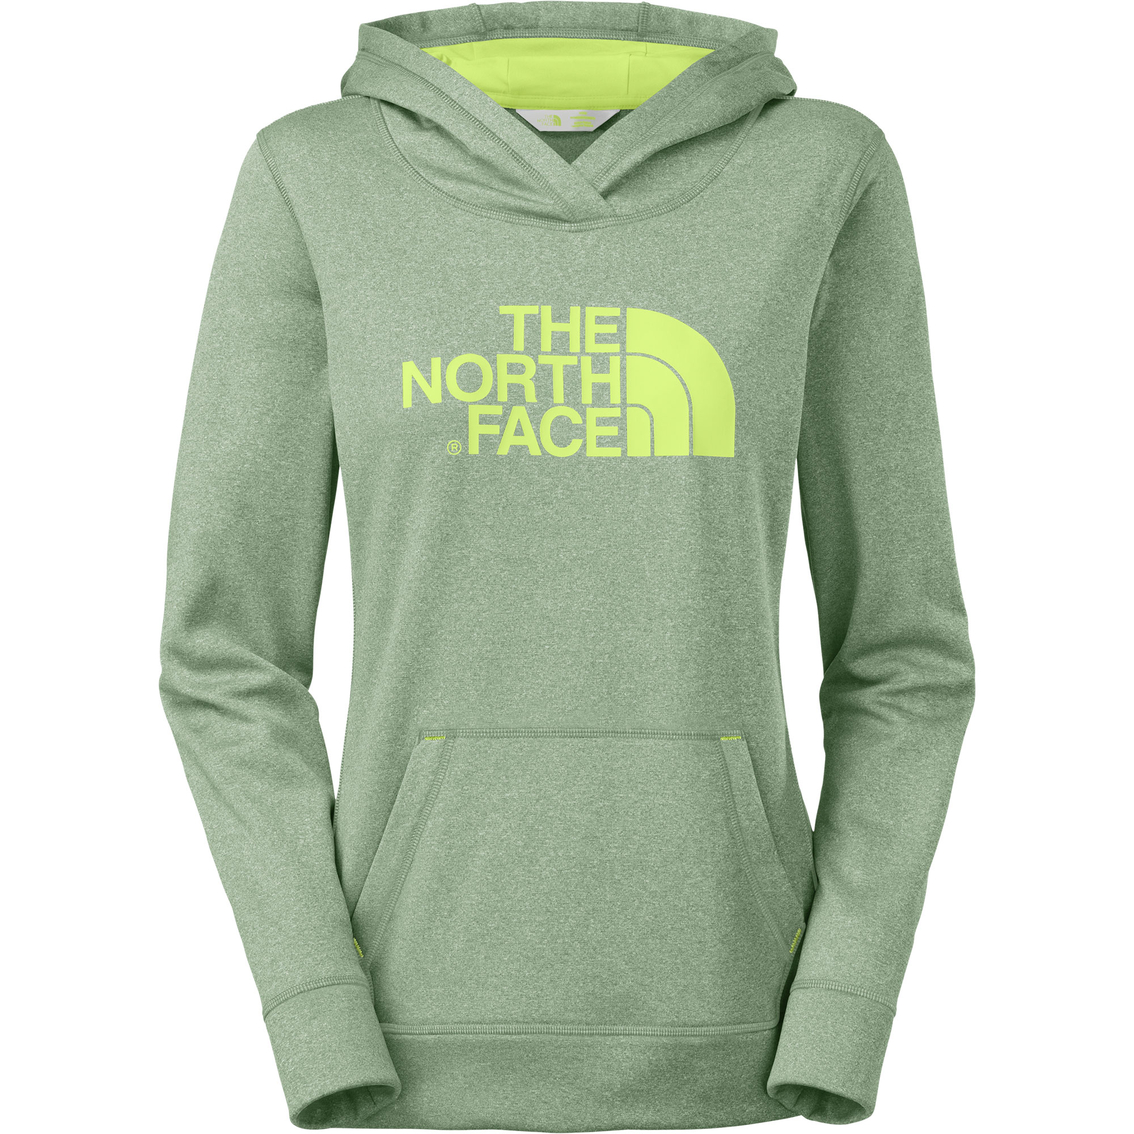 The North Face Fave Pullover Hoodie | Hoodies & Sweatshirts | Clothing ...